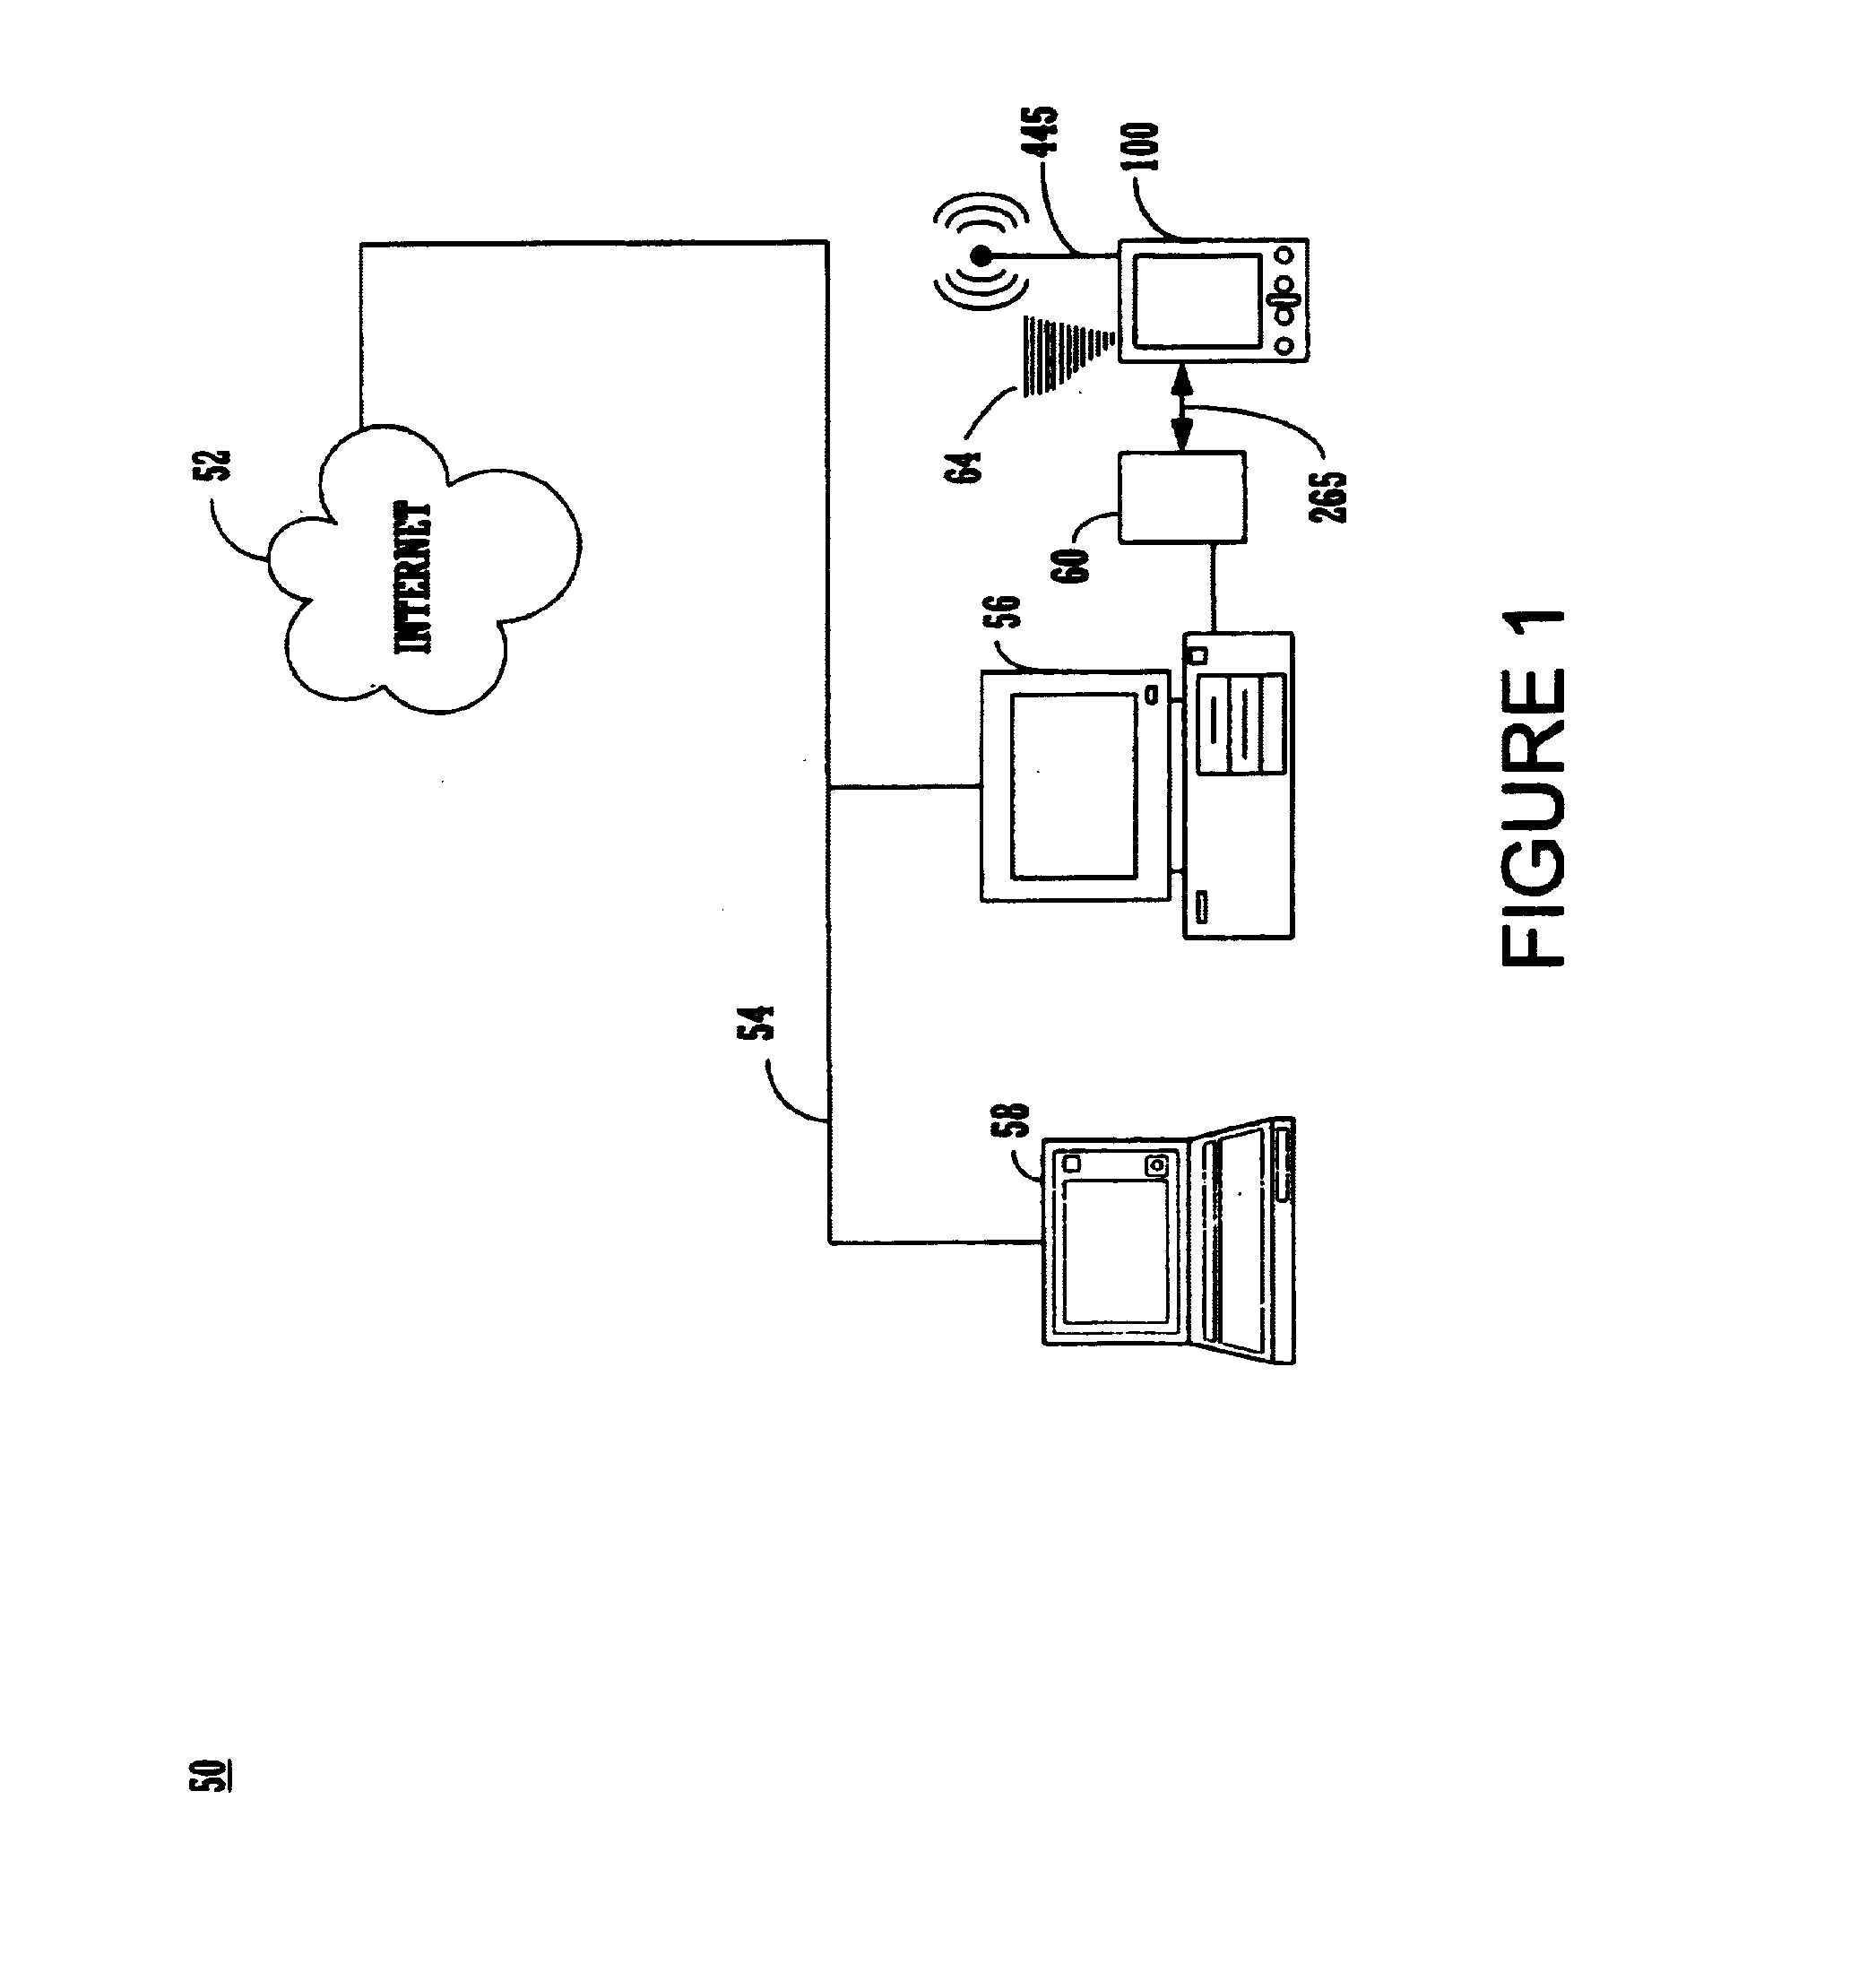 Method and apparatus for wirelessly networked distributed resource usage for data gathering